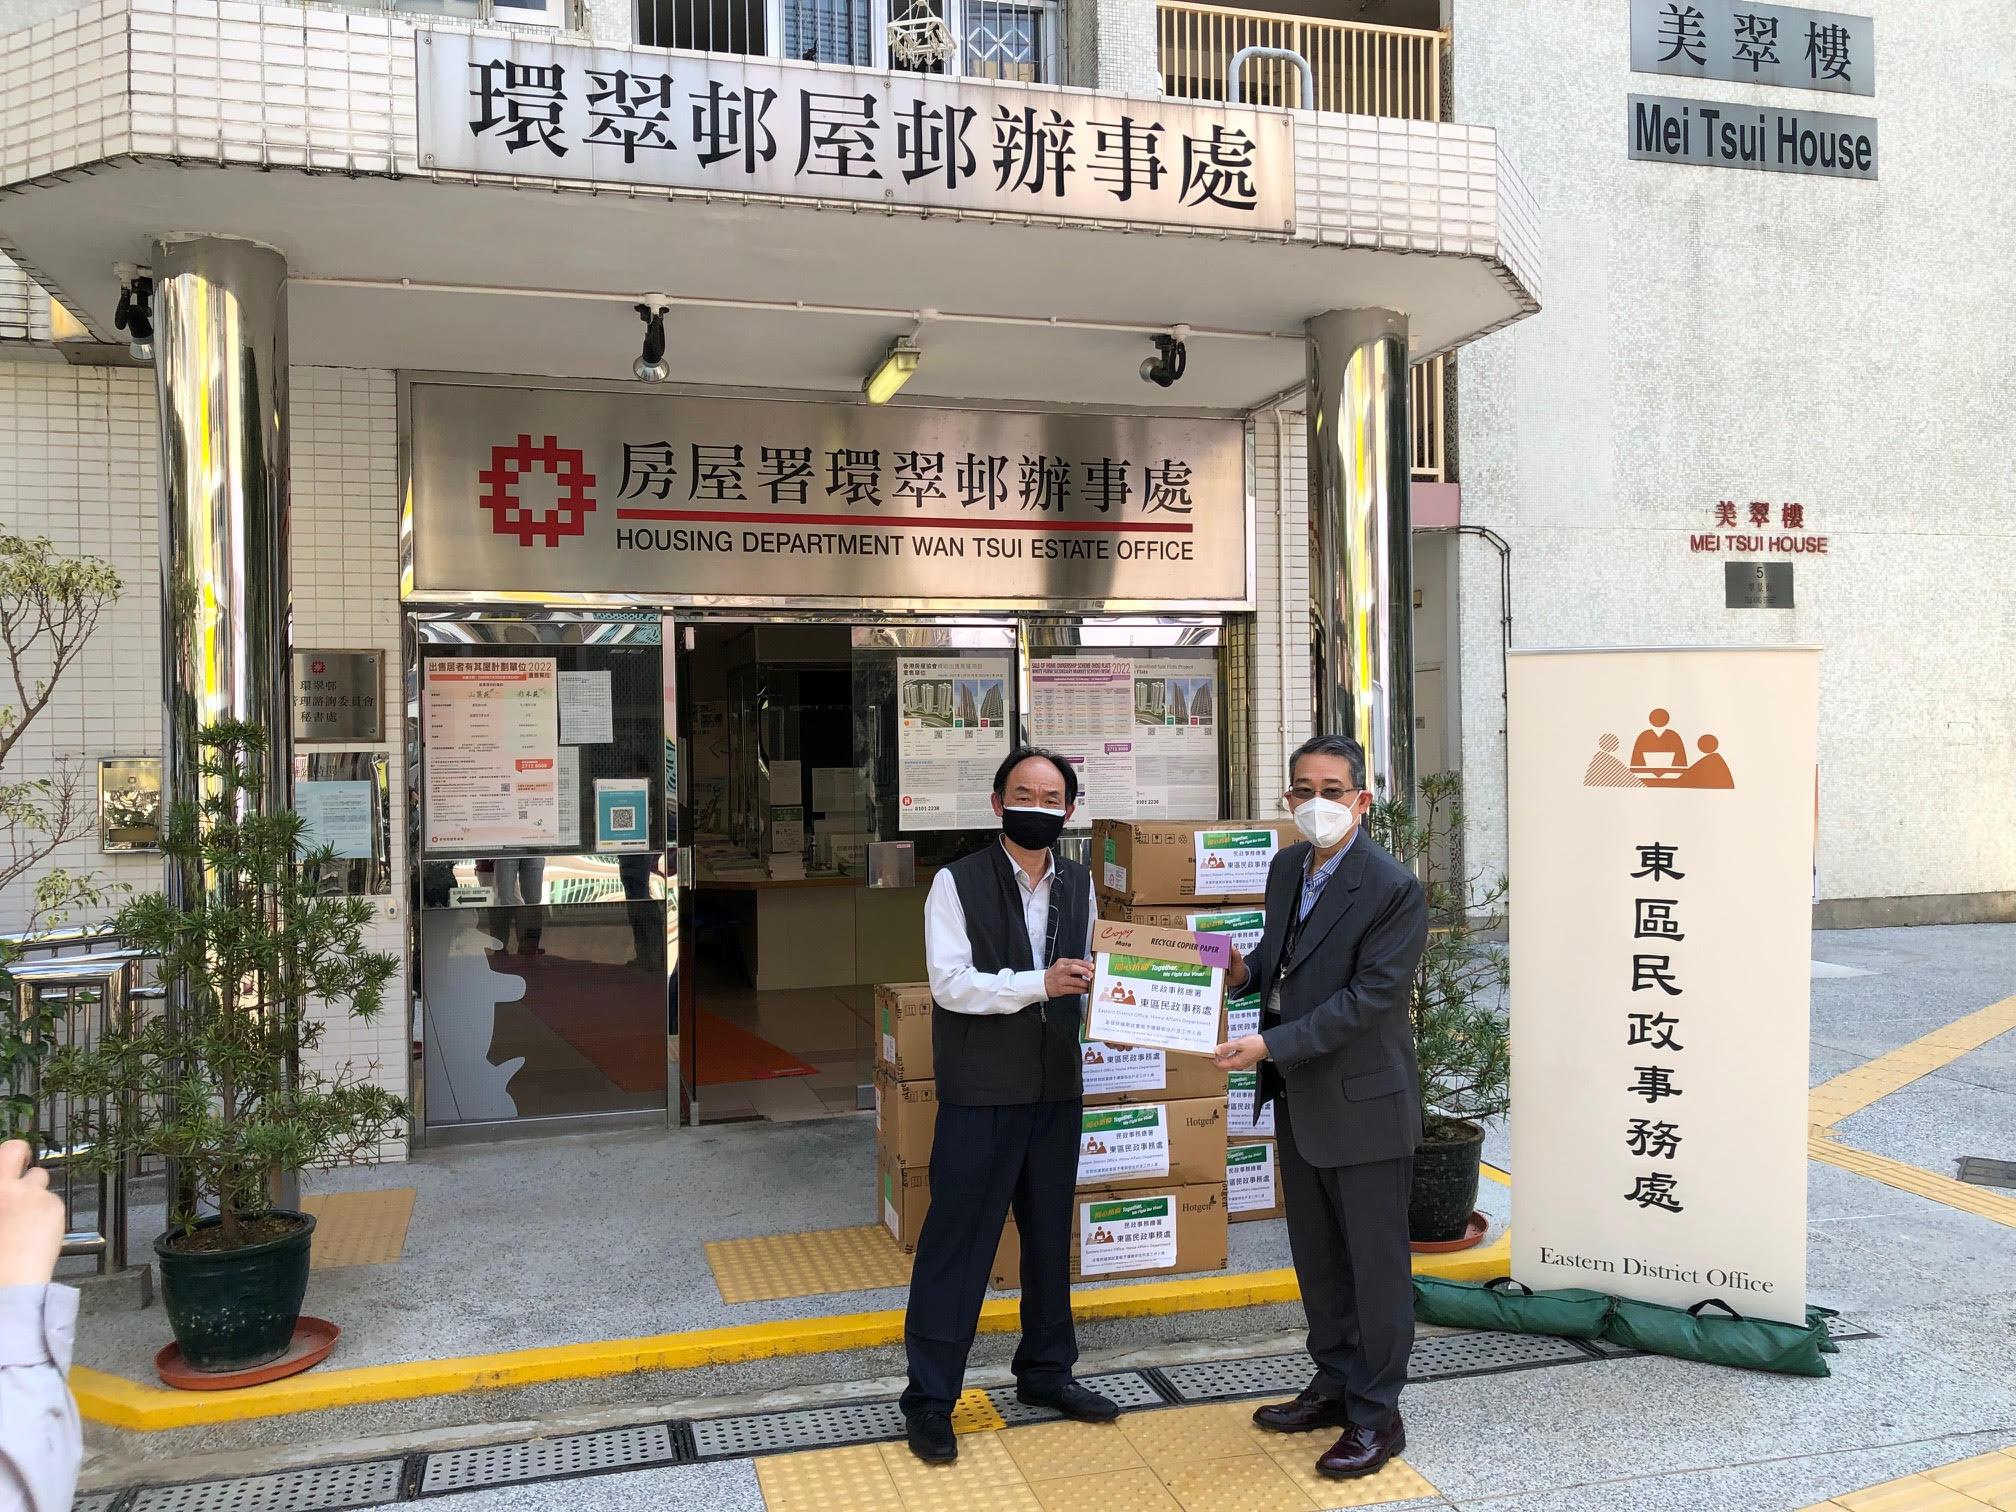 The Eastern District Office today (March 4) distributed rapid test kits to households, cleansing workers and property management staff living and working in Wan Tsui Estate for voluntary testing through the property management company. 